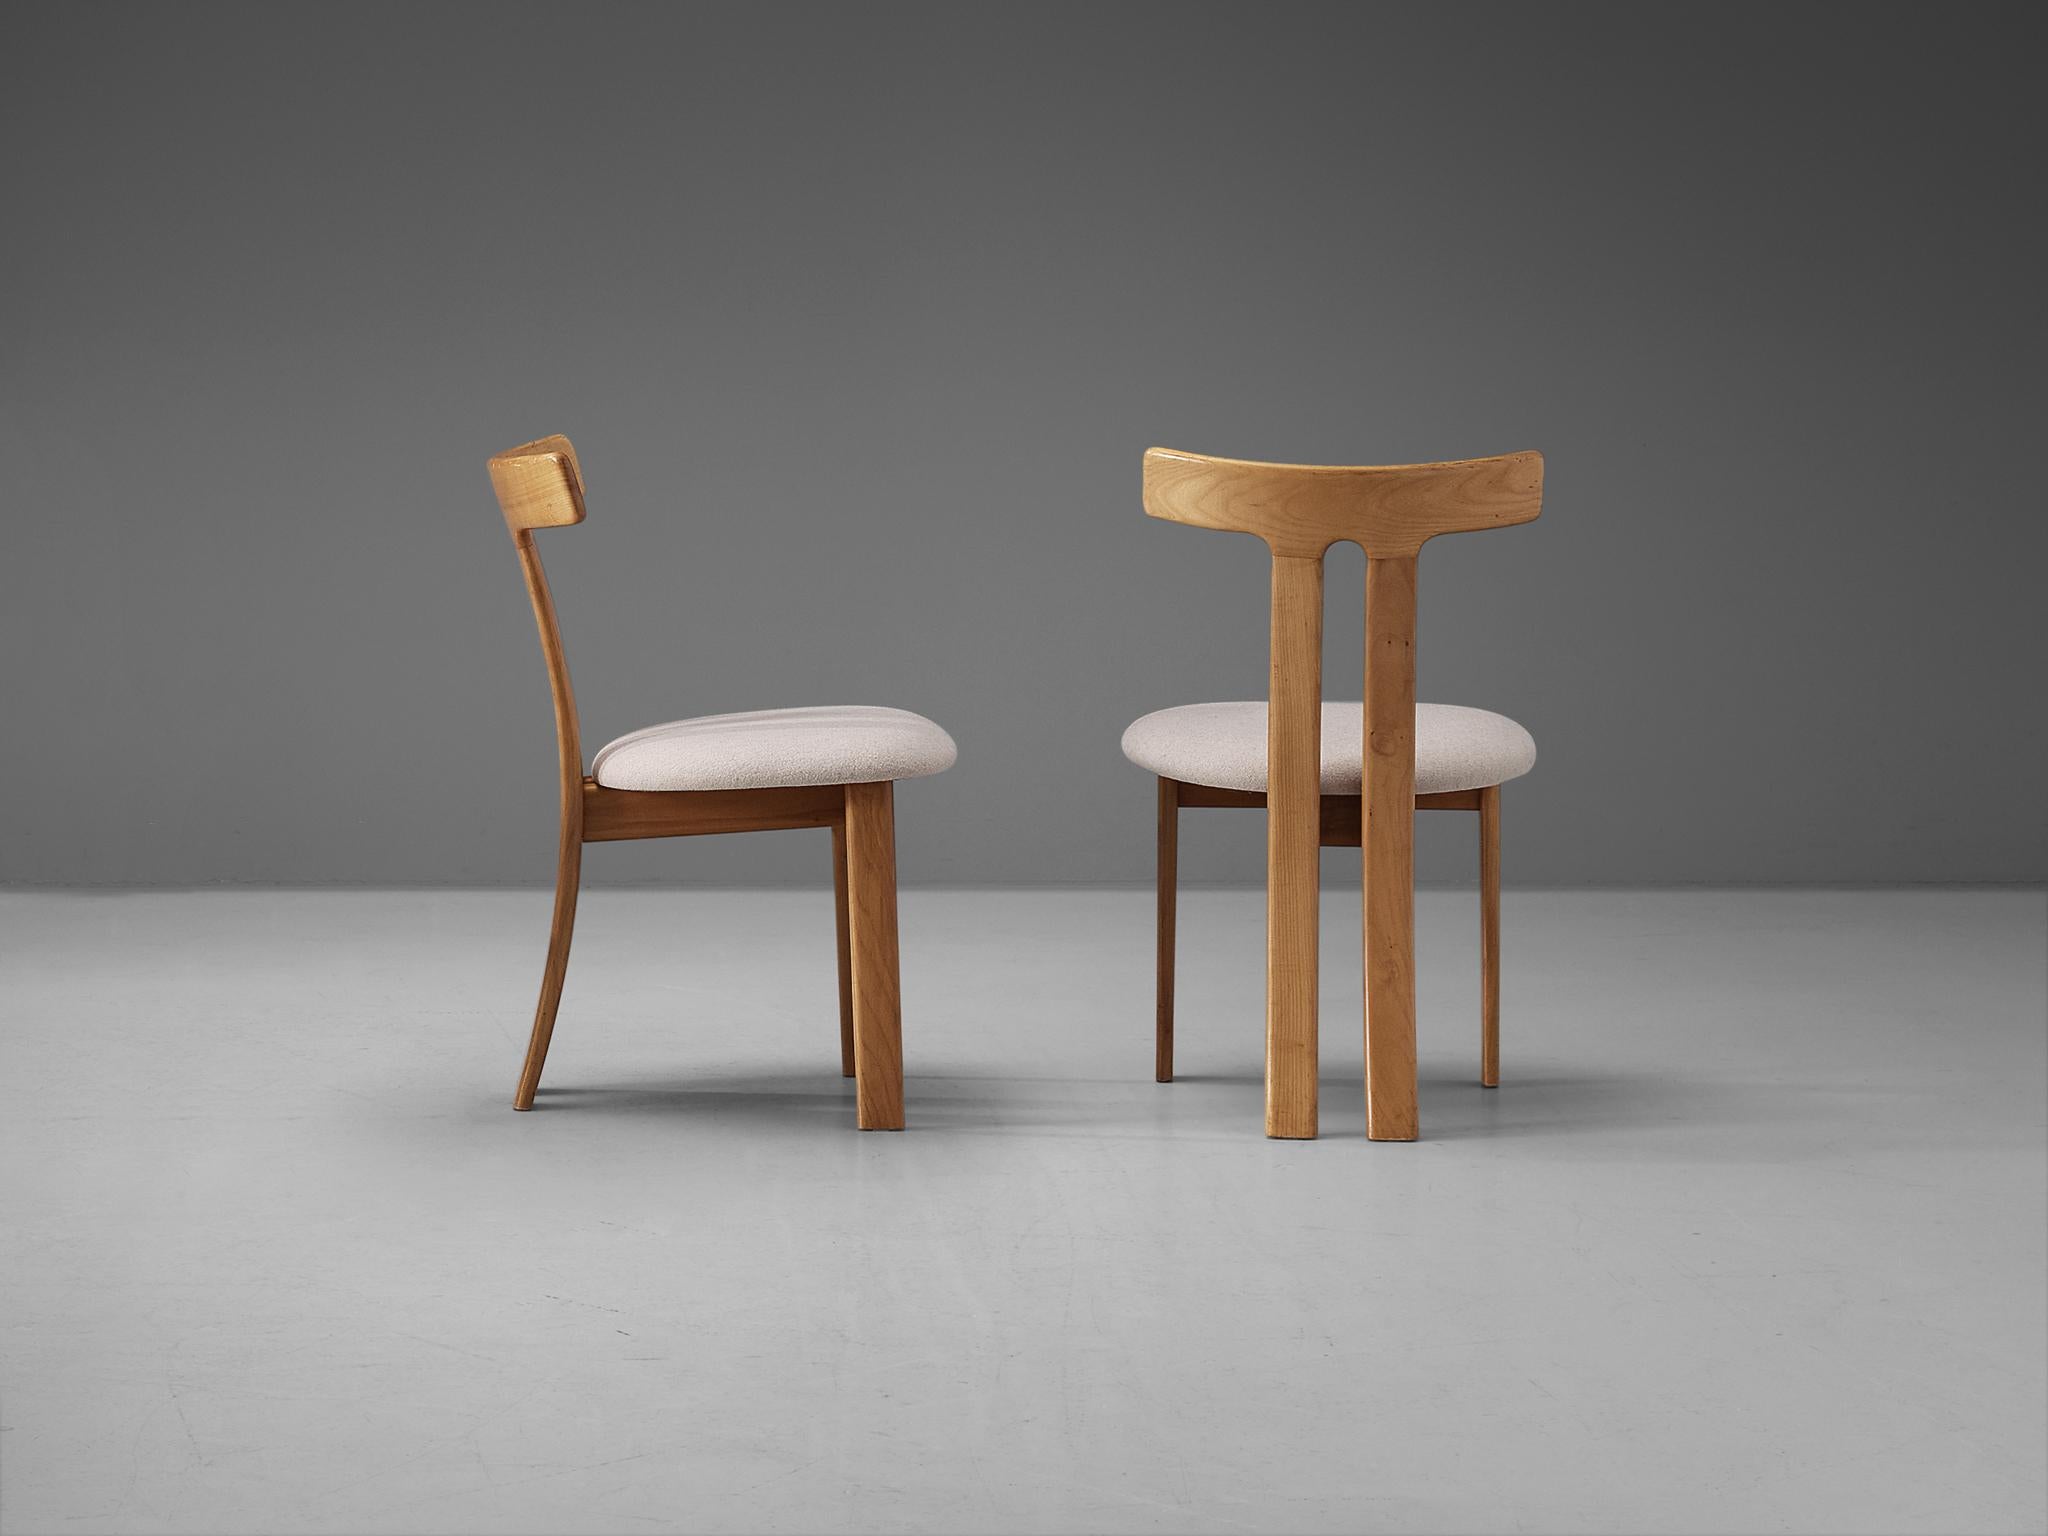 Mid-20th Century Pair of 'T-shape' Dining Chairs in Maple and White Upholstery